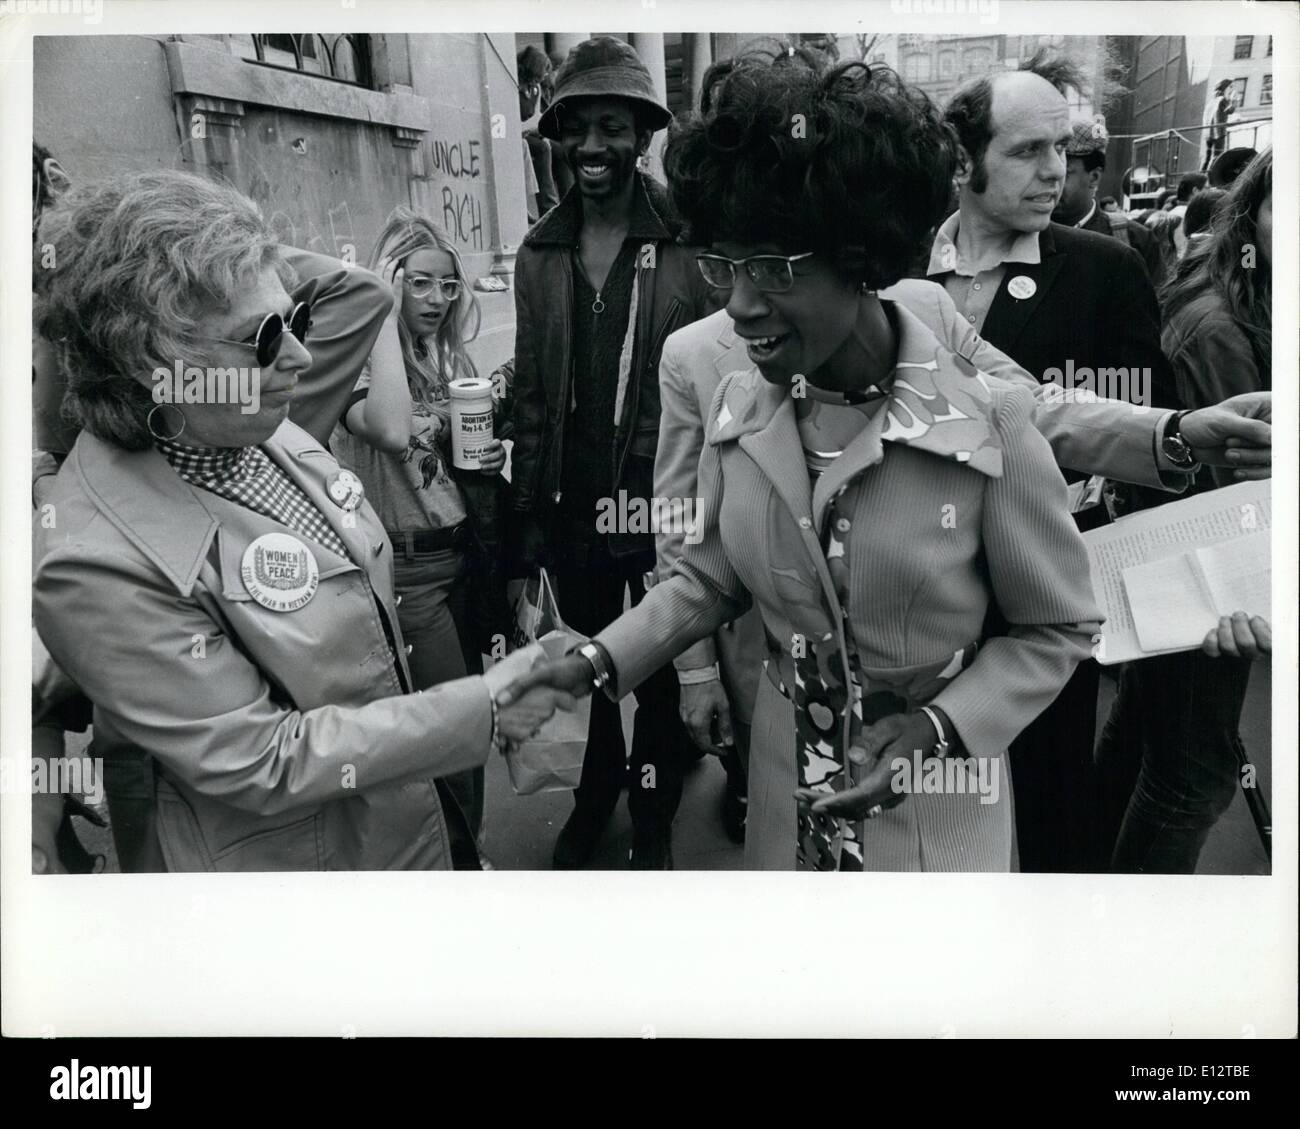 Feb. 24, 2012 - Shirley Chisholm at the Women Lib abortion demonstration, Union Square, NYC, May 6, 1972 Demonstration against the repeal of New York State's Abortion Law. Women's Lib and other organizations demonstrated at Union Square with mostly young female marchers equipped with a variety of signs, banners and button, for the upholding of New York's one year old liberal abortion law. May 6, 1972 Stock Photo